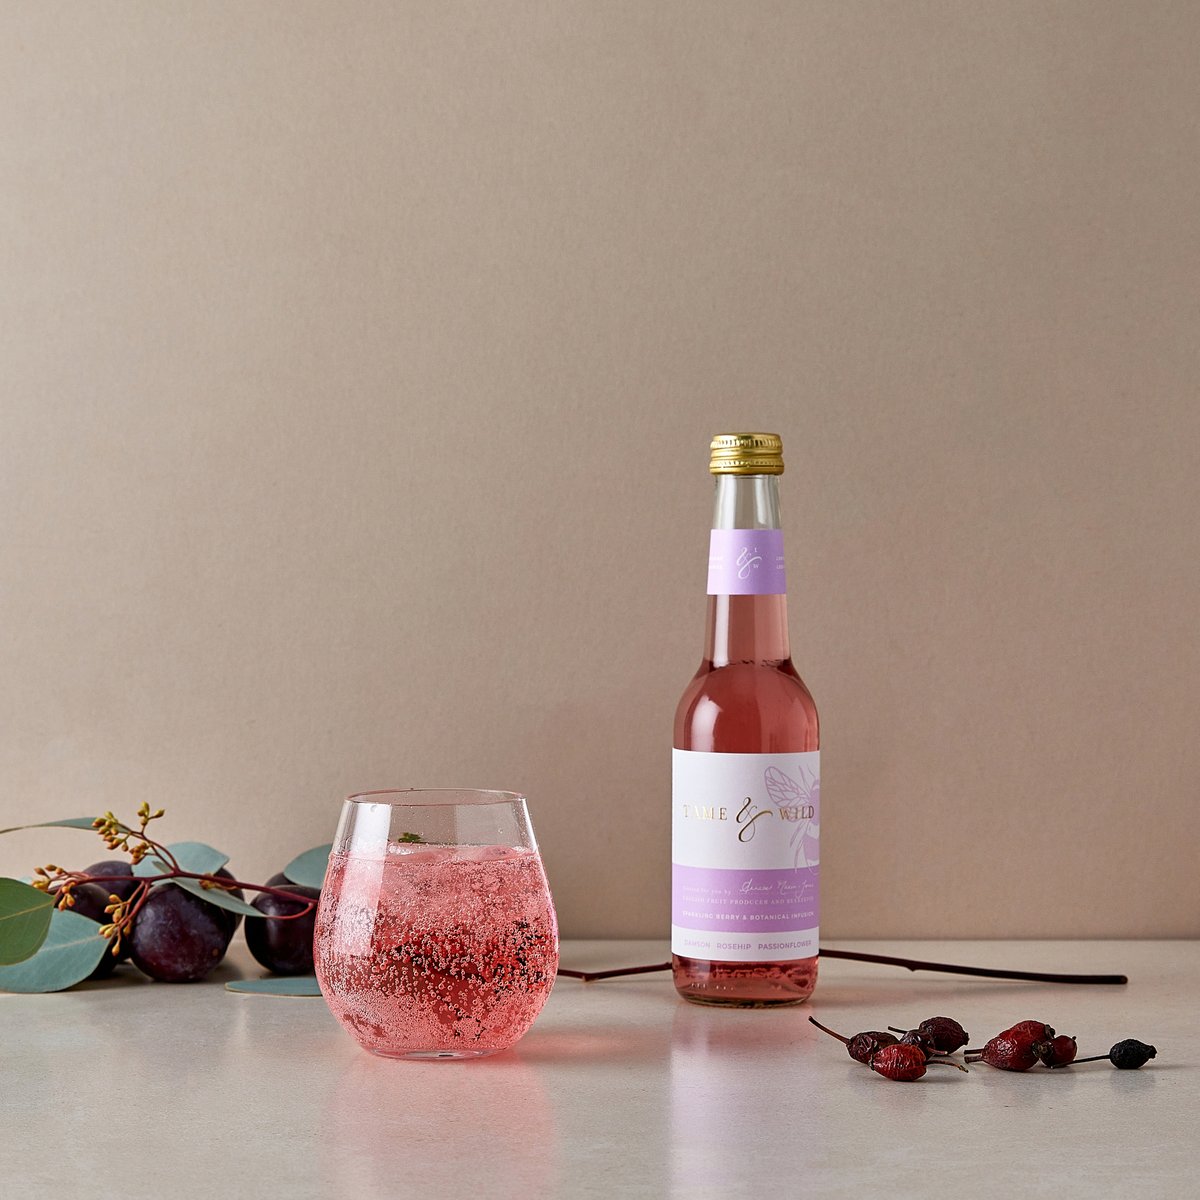 Our beautiful Damson & Rosehip is now available online....

A quintessential English sparkling drink with damsons, blush rosehips and passionflower.
  ⠀⠀⠀⠀⠀⠀⠀⠀⠀⠀⠀⠀
🛍: bit.ly/2SLGfOh

#mindfulness #mindfuldrinking 
  ⠀⠀⠀⠀⠀⠀⠀⠀⠀⠀⠀⠀